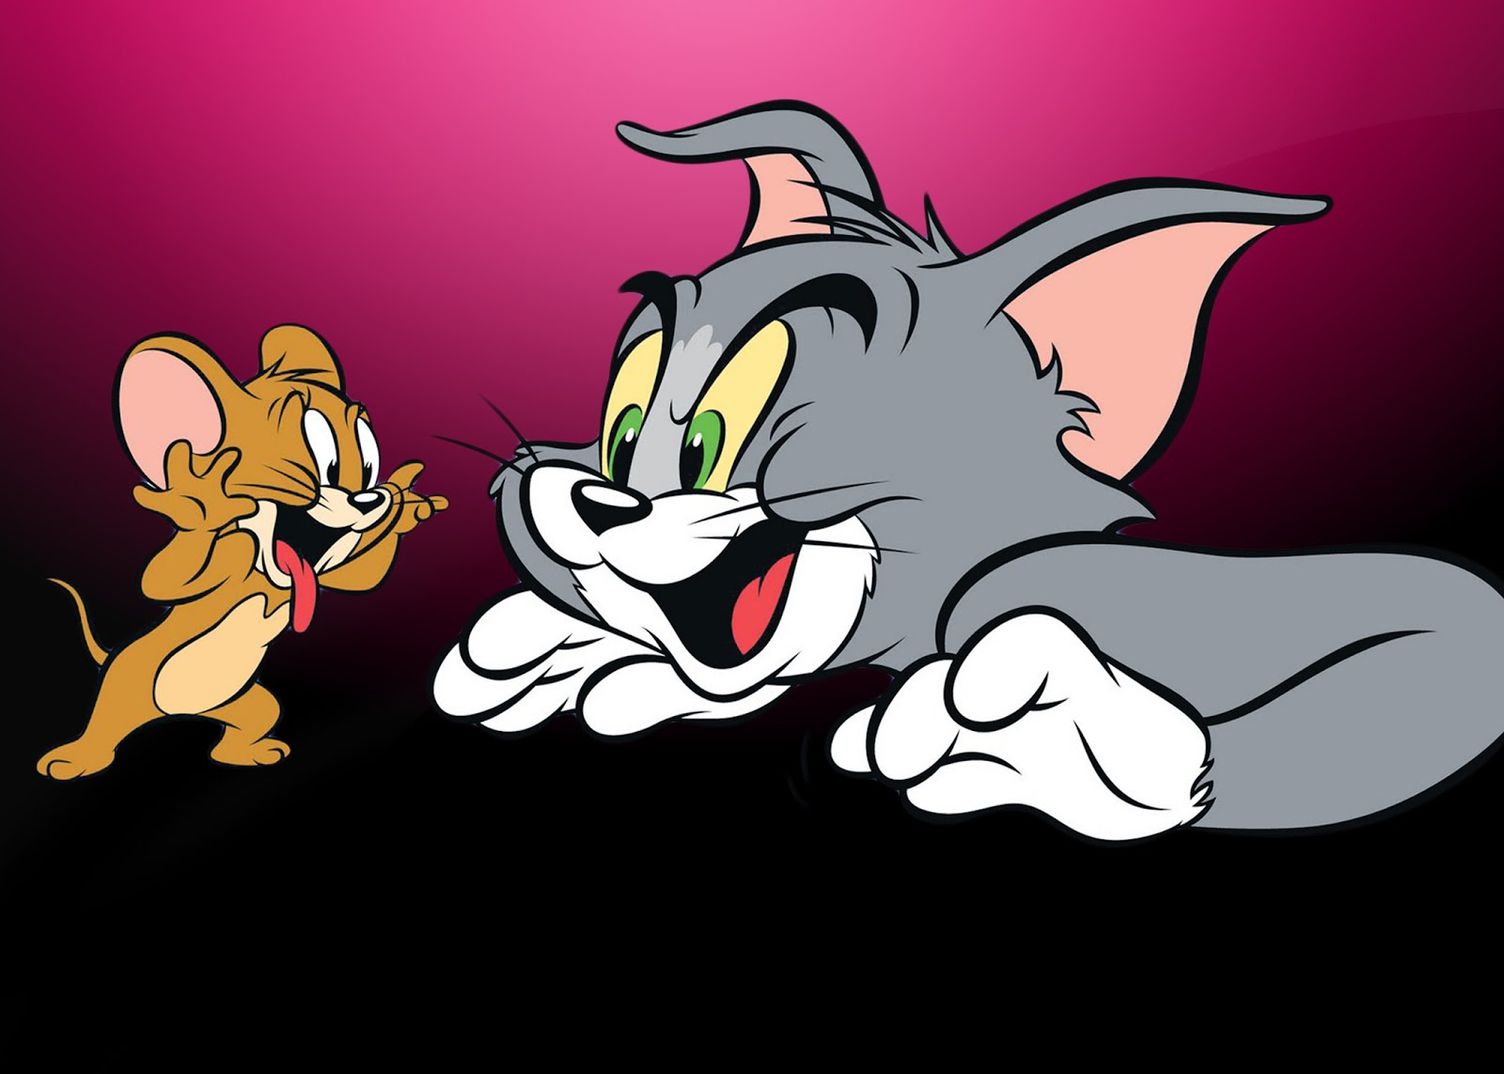 Tom and jerry 55. Tom and Jerry. Том и Джерри (Tom and Jerry) 1940. Том и Джерри Дисней.